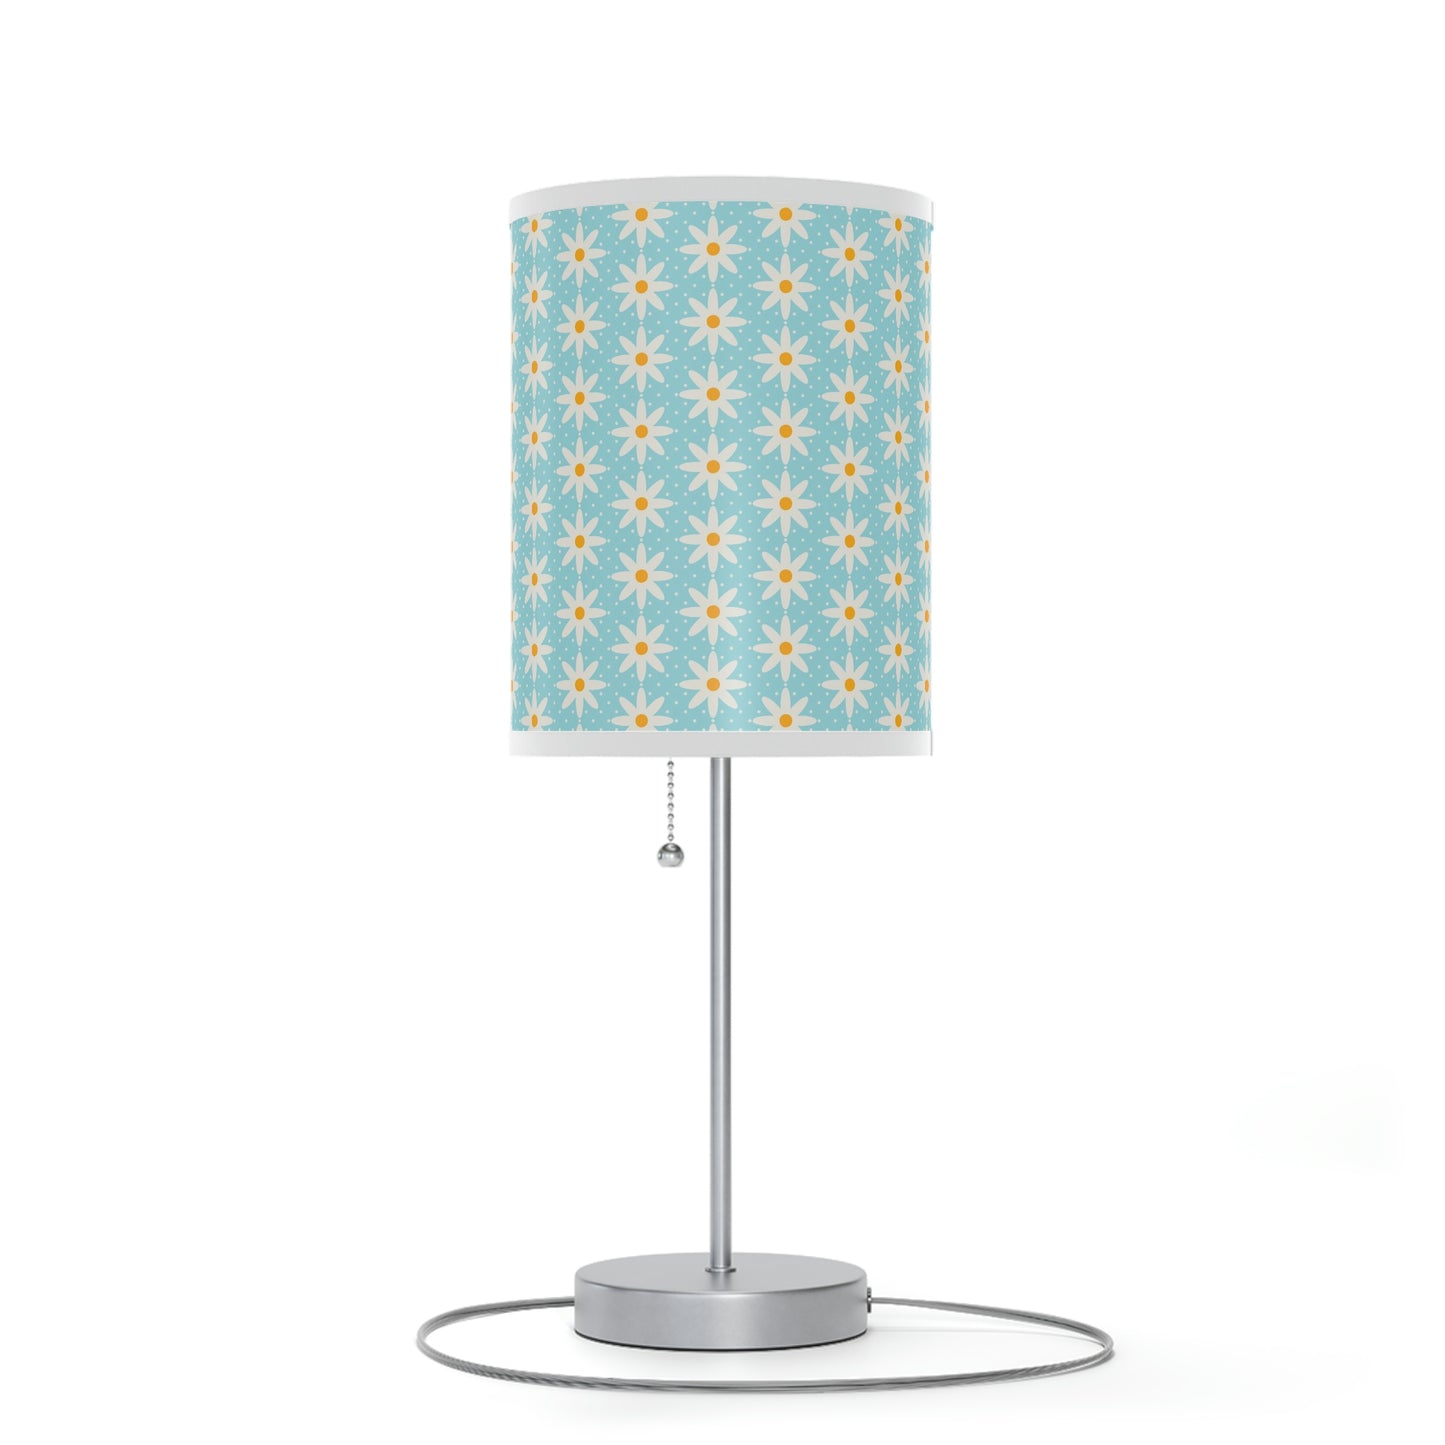 blue lamp with white floral pattern baby nursery lamp